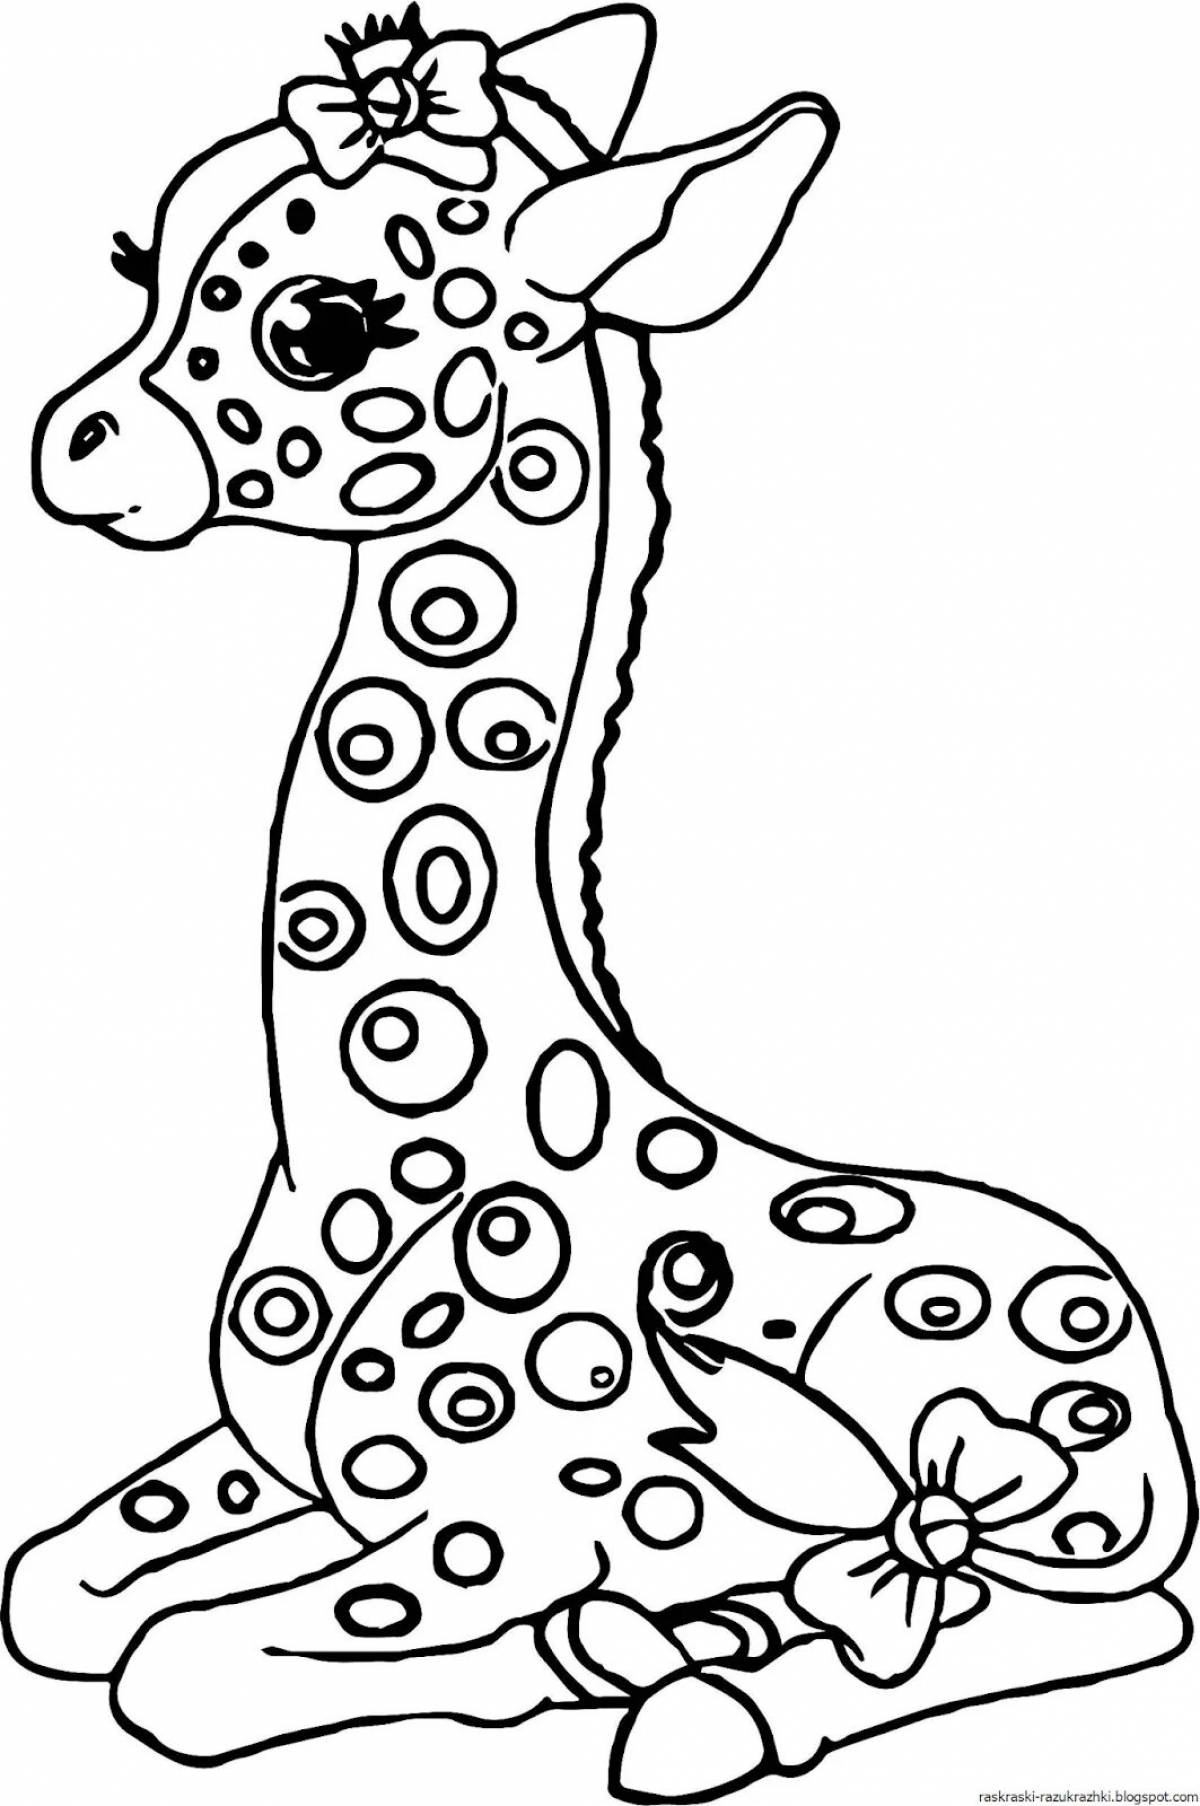 Great giraffe coloring book for 4-5 year olds